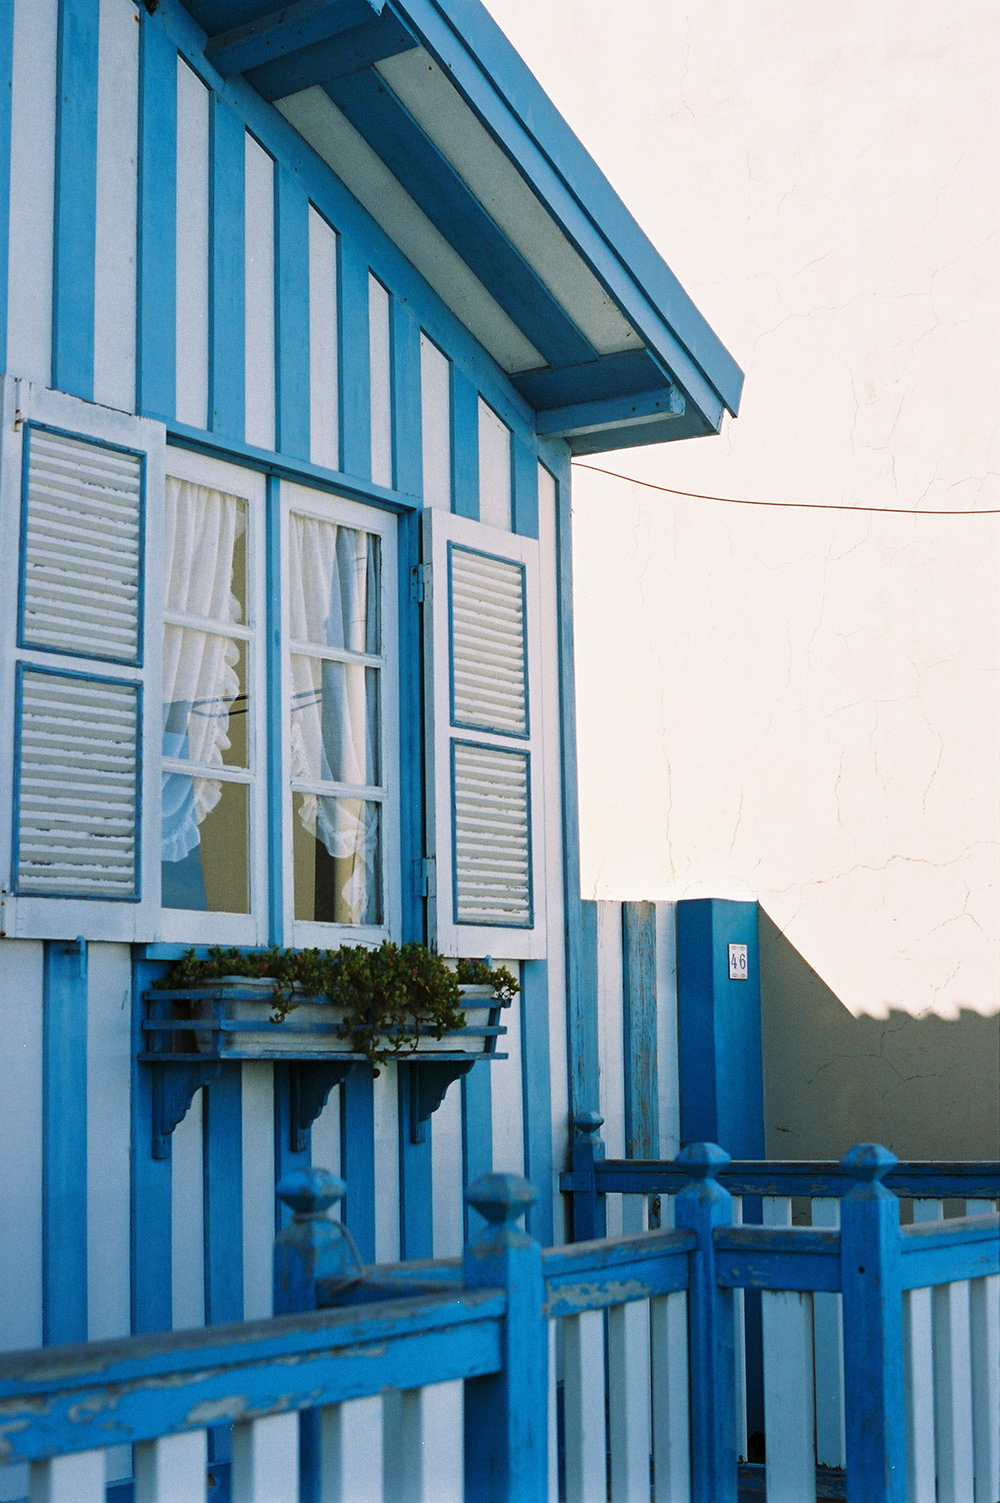 Analog photo of a striped blue and white beach house.